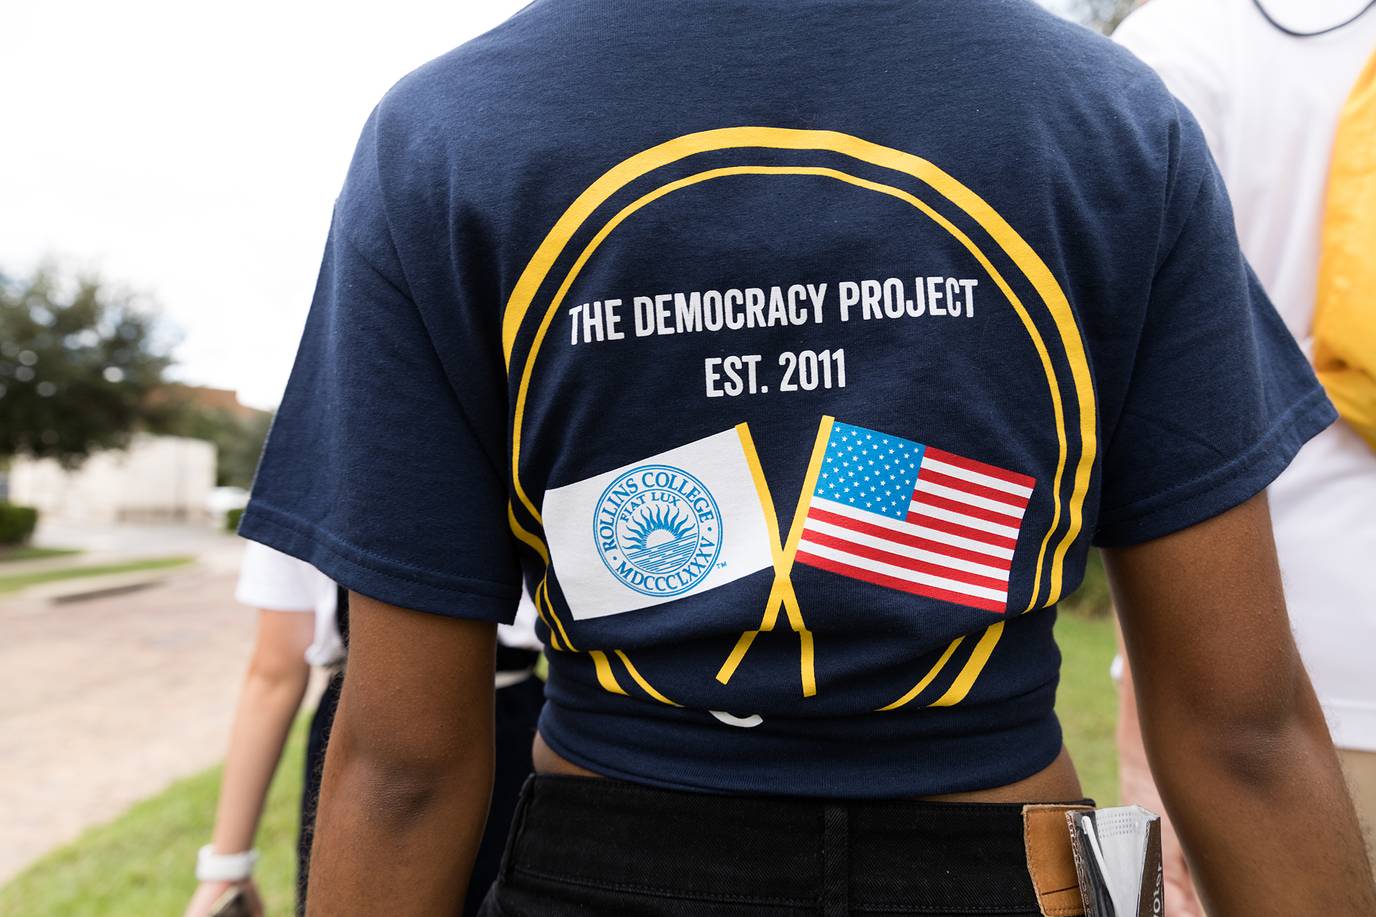 A student sports a Democracy Project T-shirt on campus.